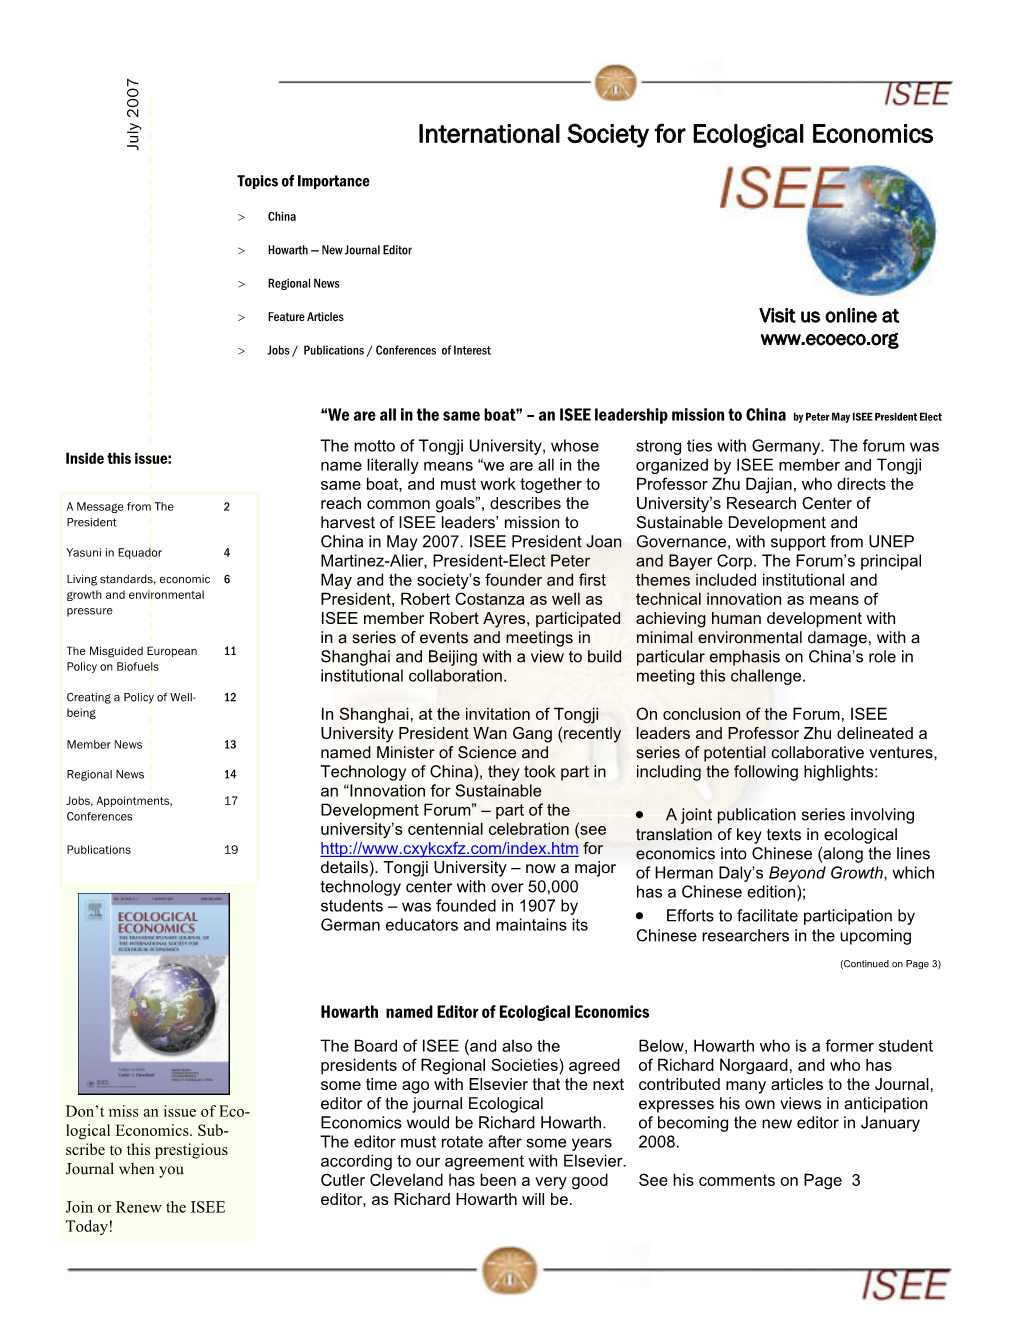 The International Society for Ecological Economics